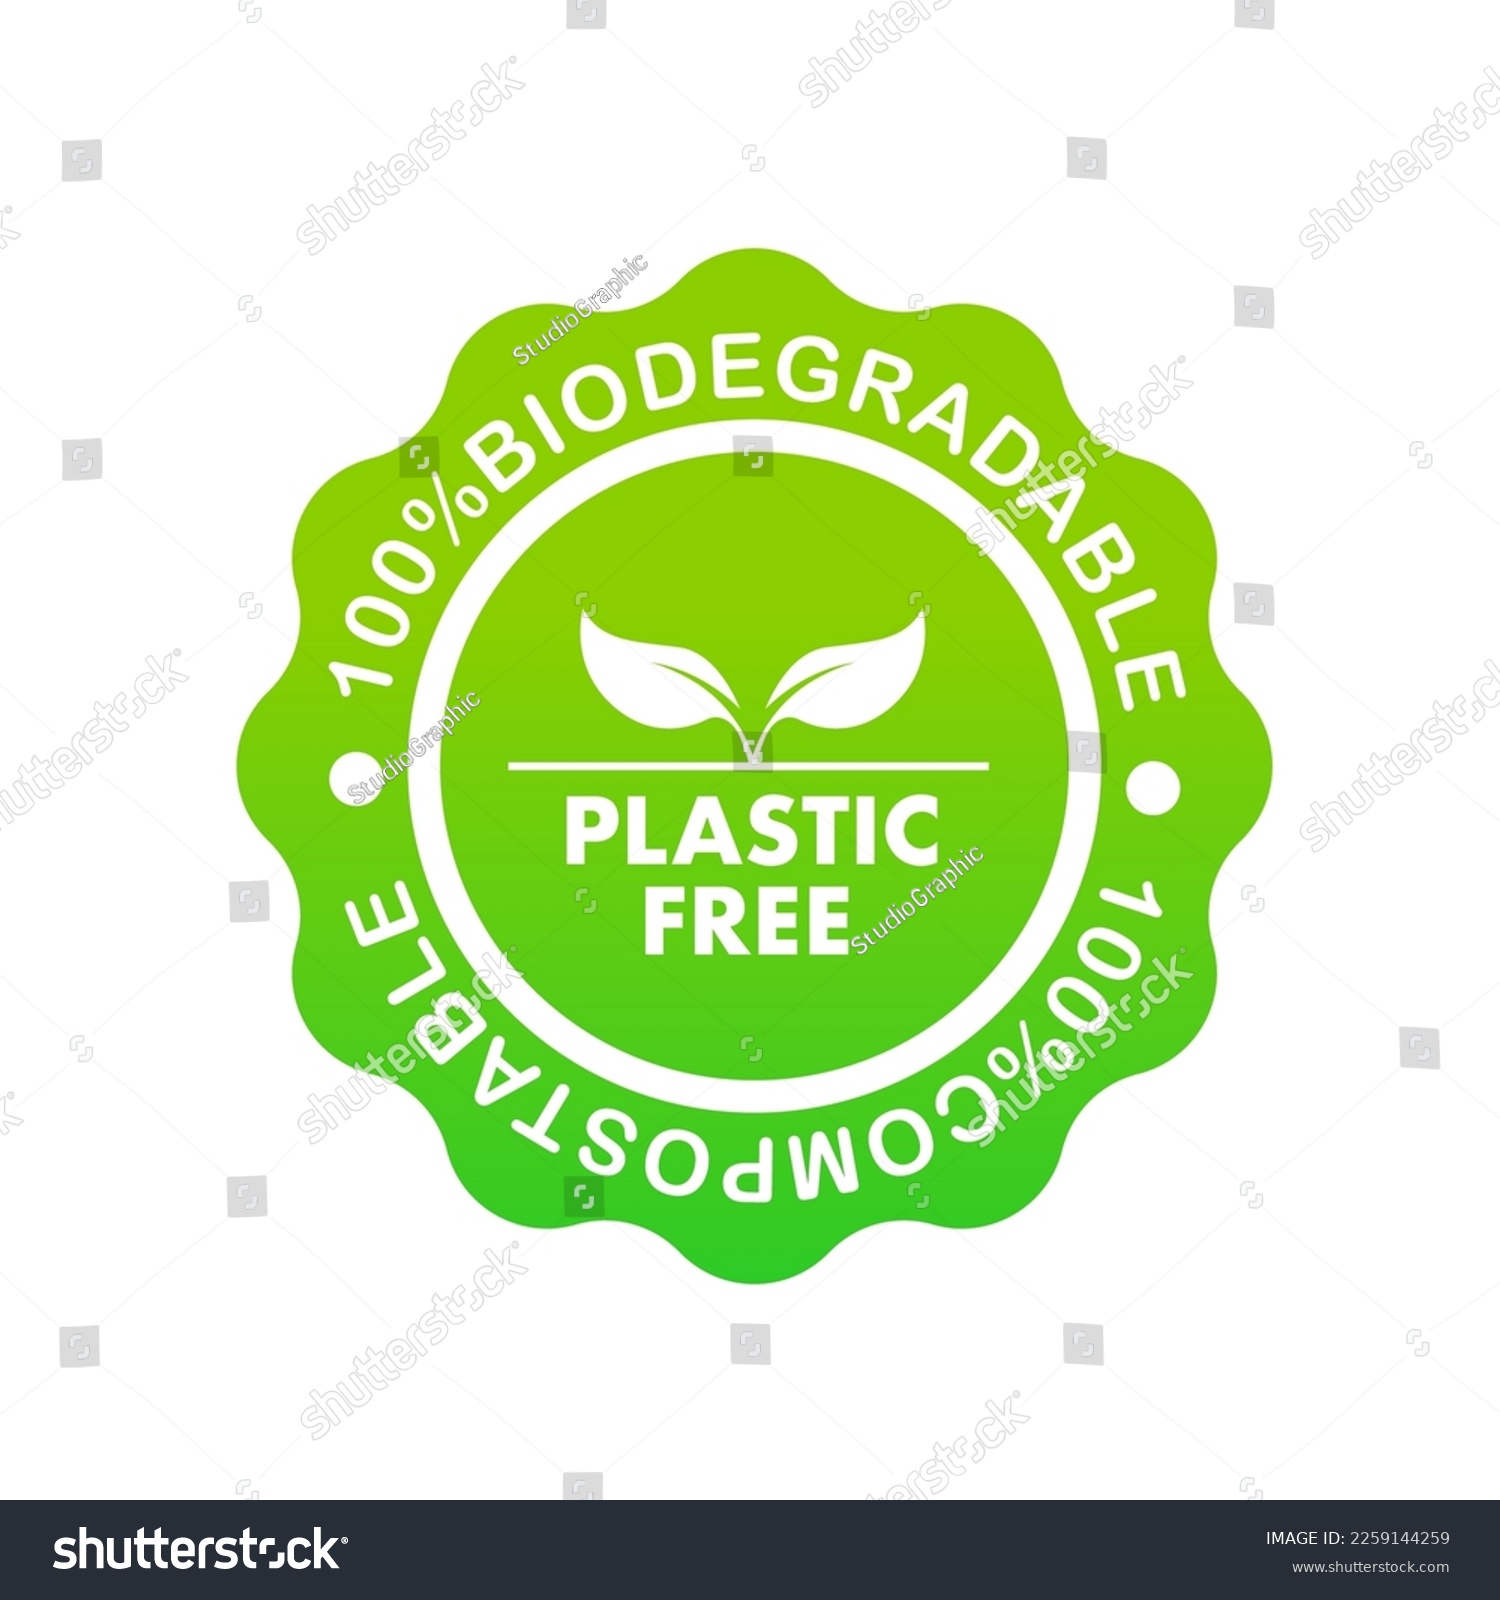 SVG of Label plastic free. 100% biodegradable 100% compostable icon, logo. Green leaves in a circle. Round biodegradable symbol. Natural recyclable packaging sign. Eco friendly product. Vector illustration svg